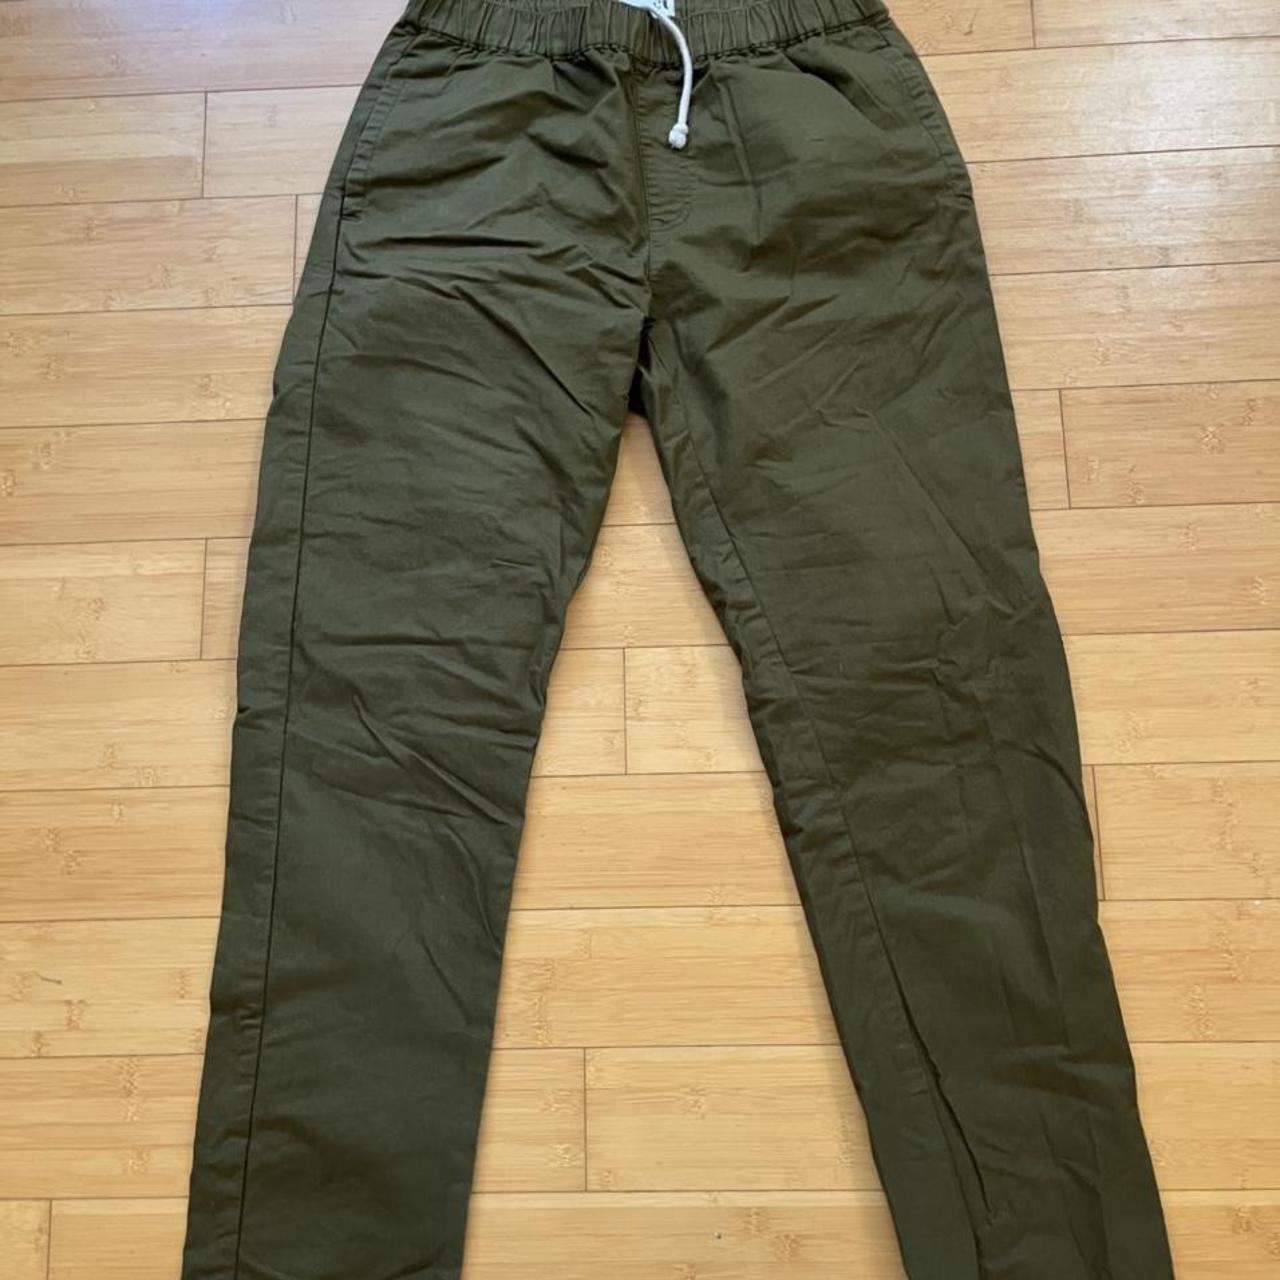 Green Pact pants with yellow stripe on... - Depop